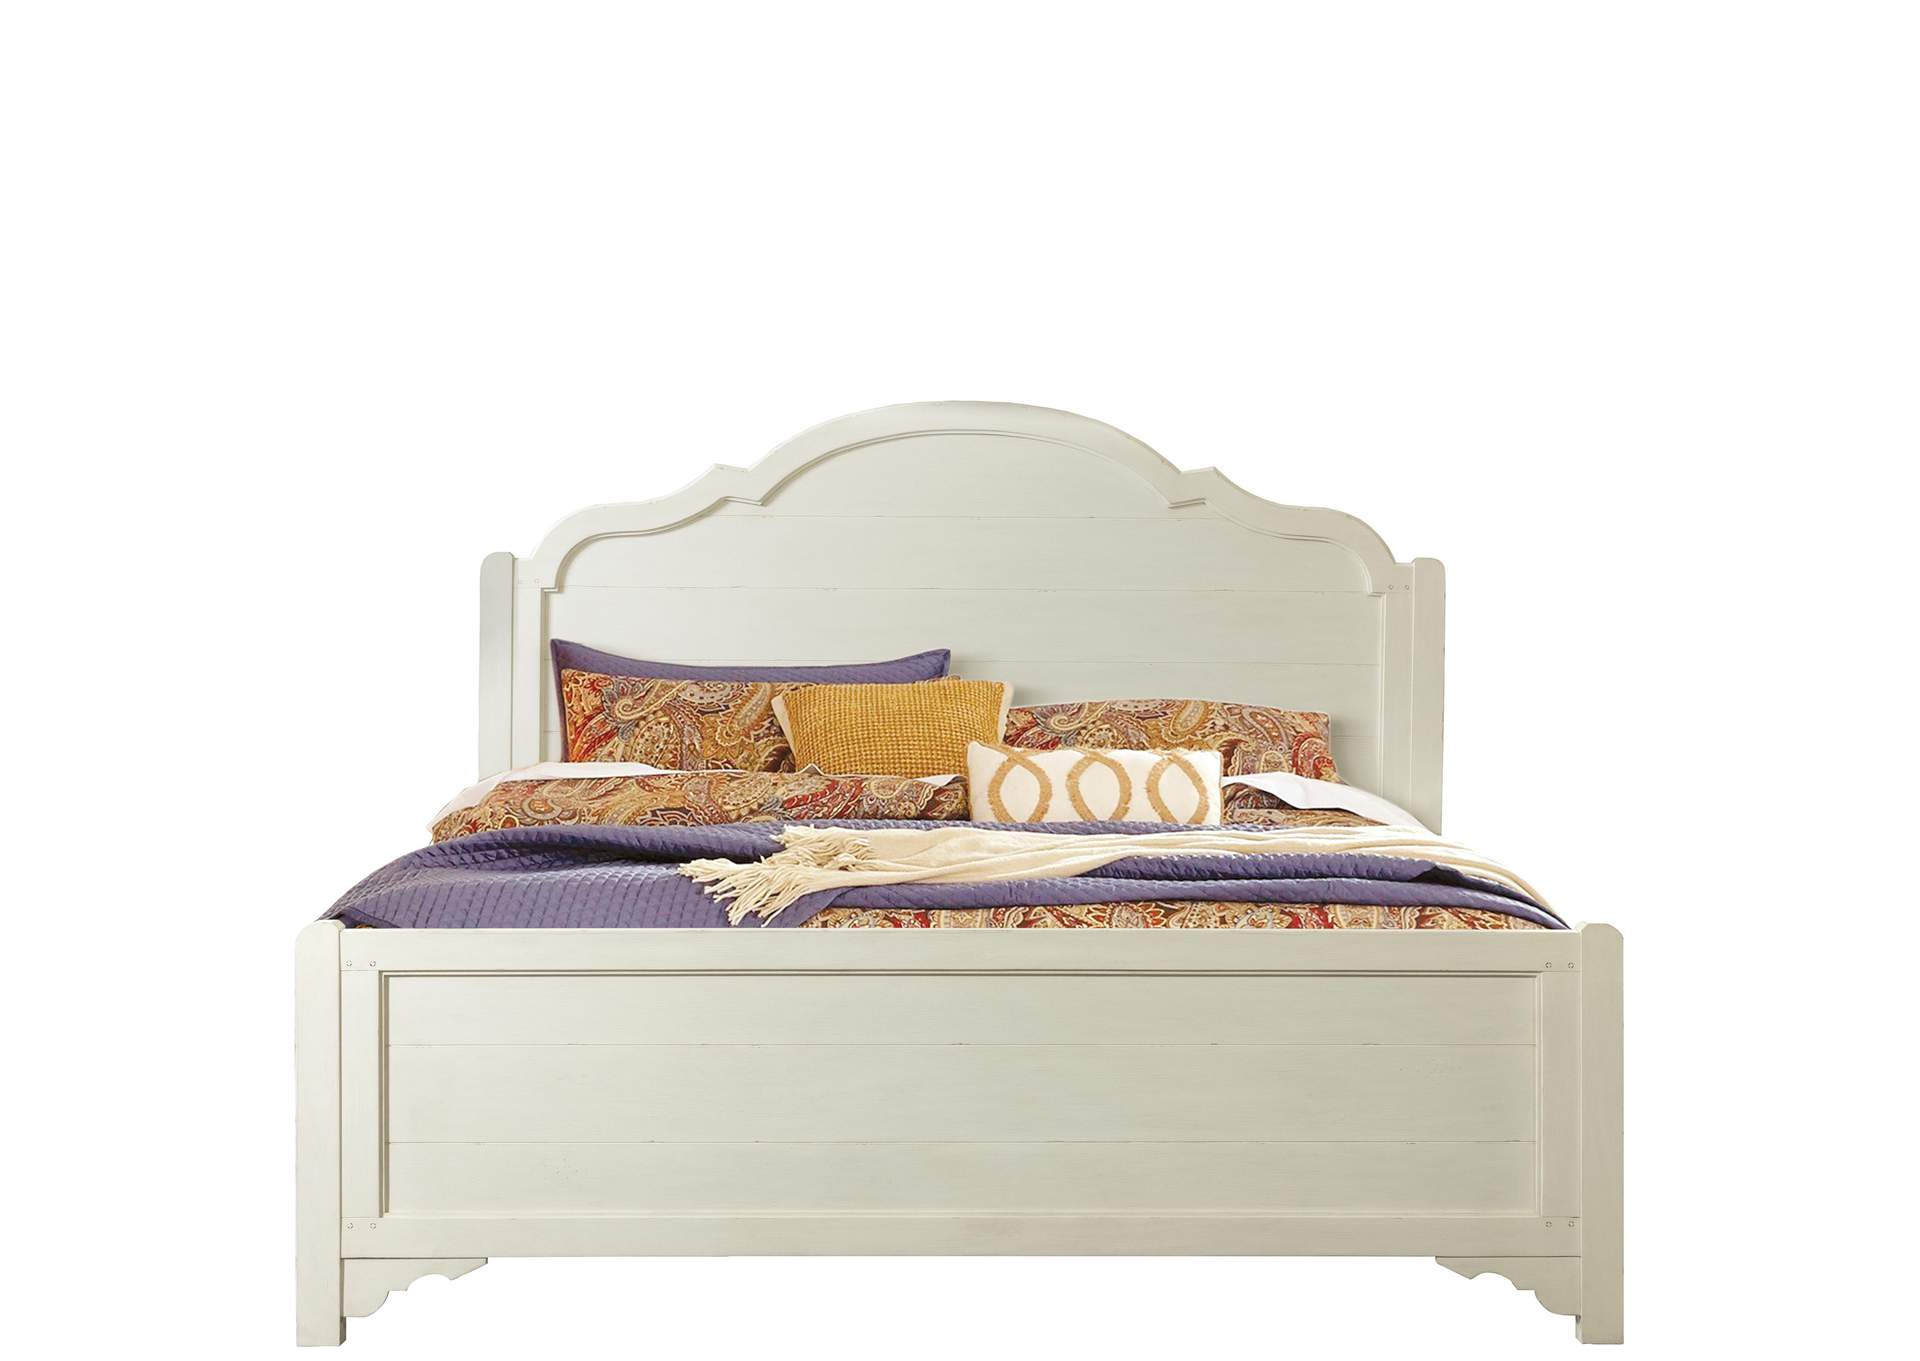 Grand Haven Feathered White Panel California King Bed,Riverside